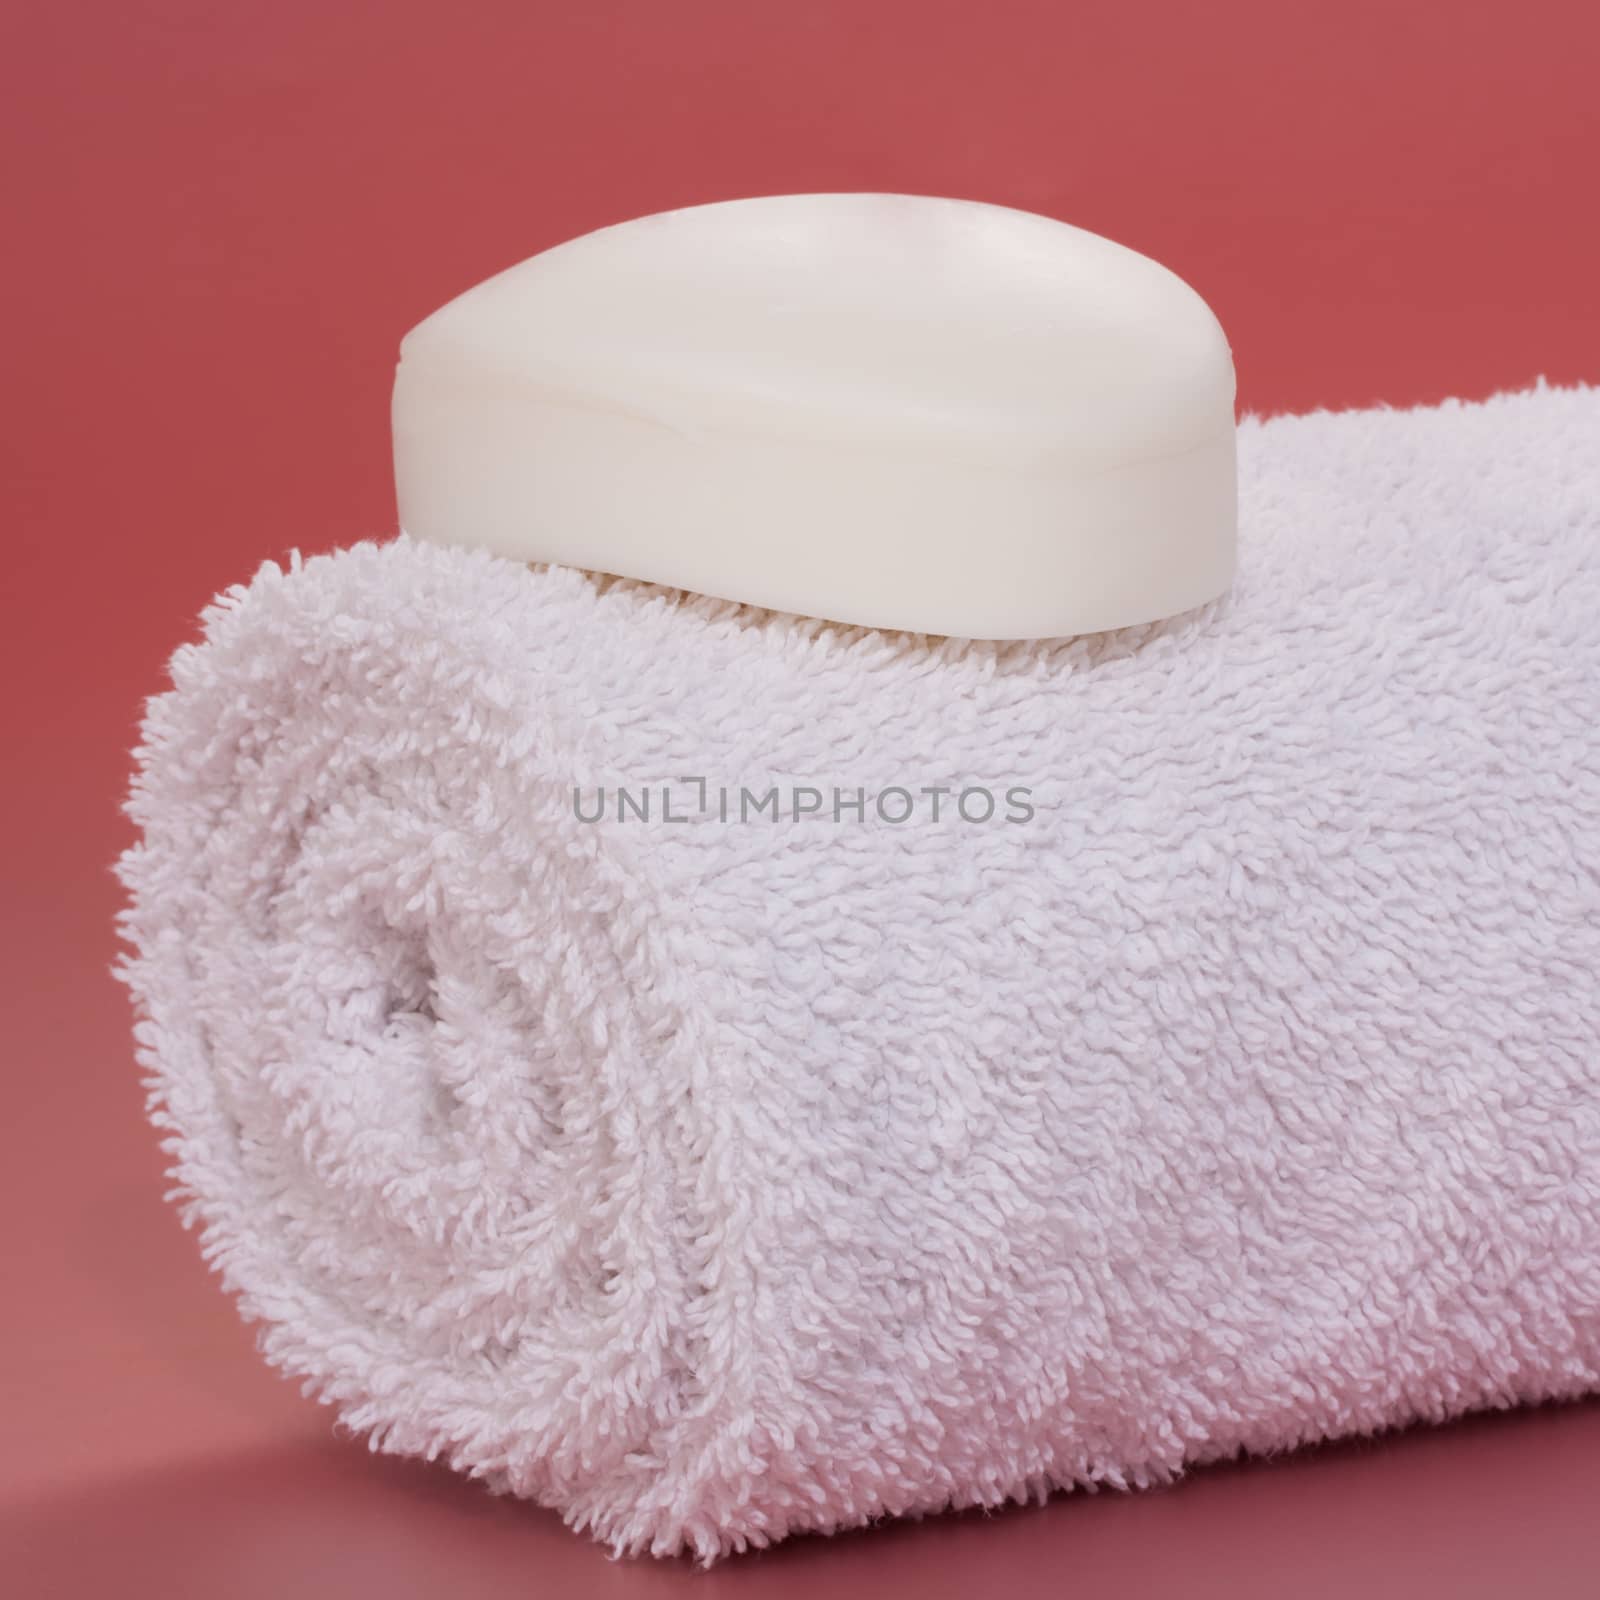 White soap bar placed over a rolled clean bath towel